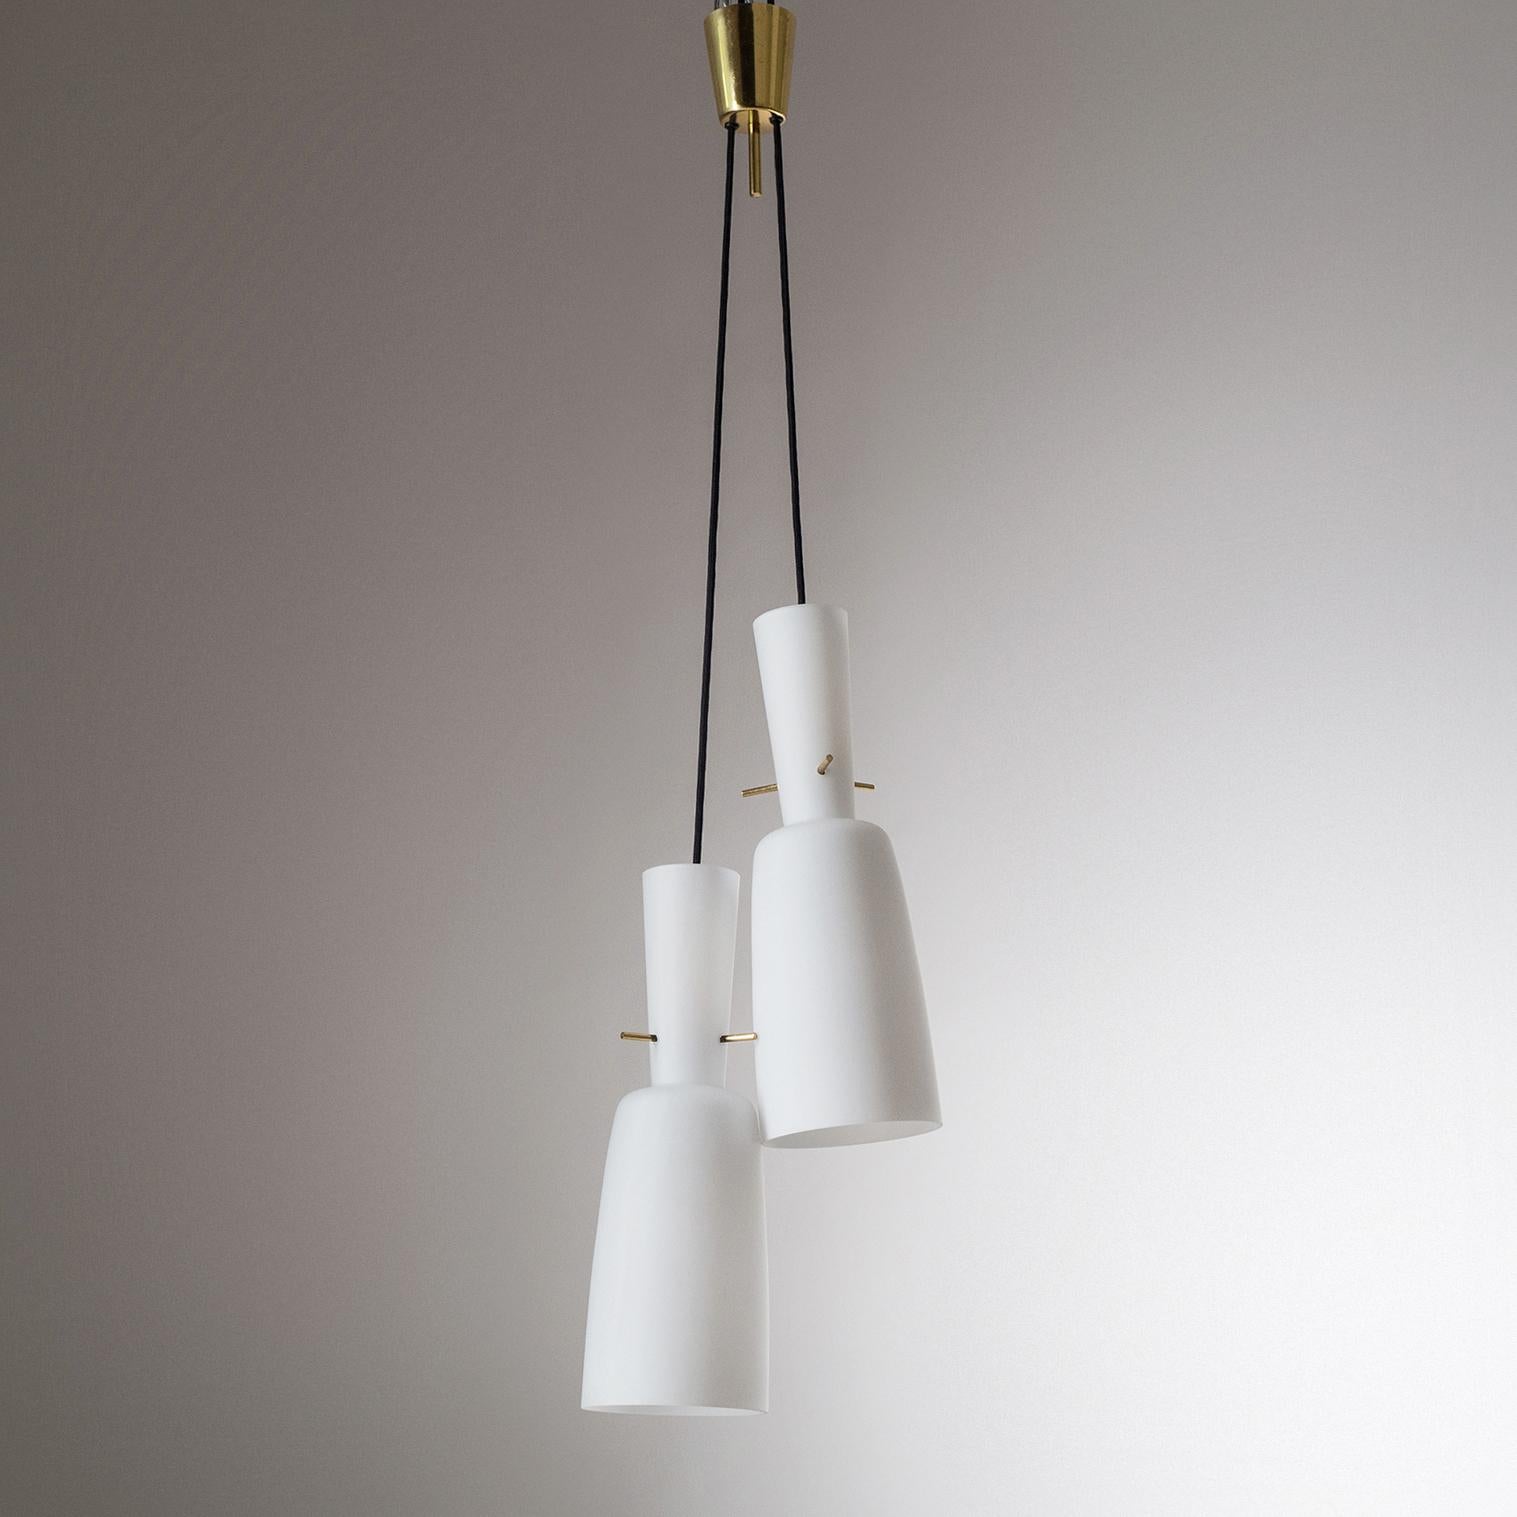 Rare dual-glass version of model 3183 pendant by J.T. Kalmar, 1950s. Two satin glass diffusers from a single canopy can be individually adjusted in height. Very good original condition with a light patina on the brass parts. Two original brass E27